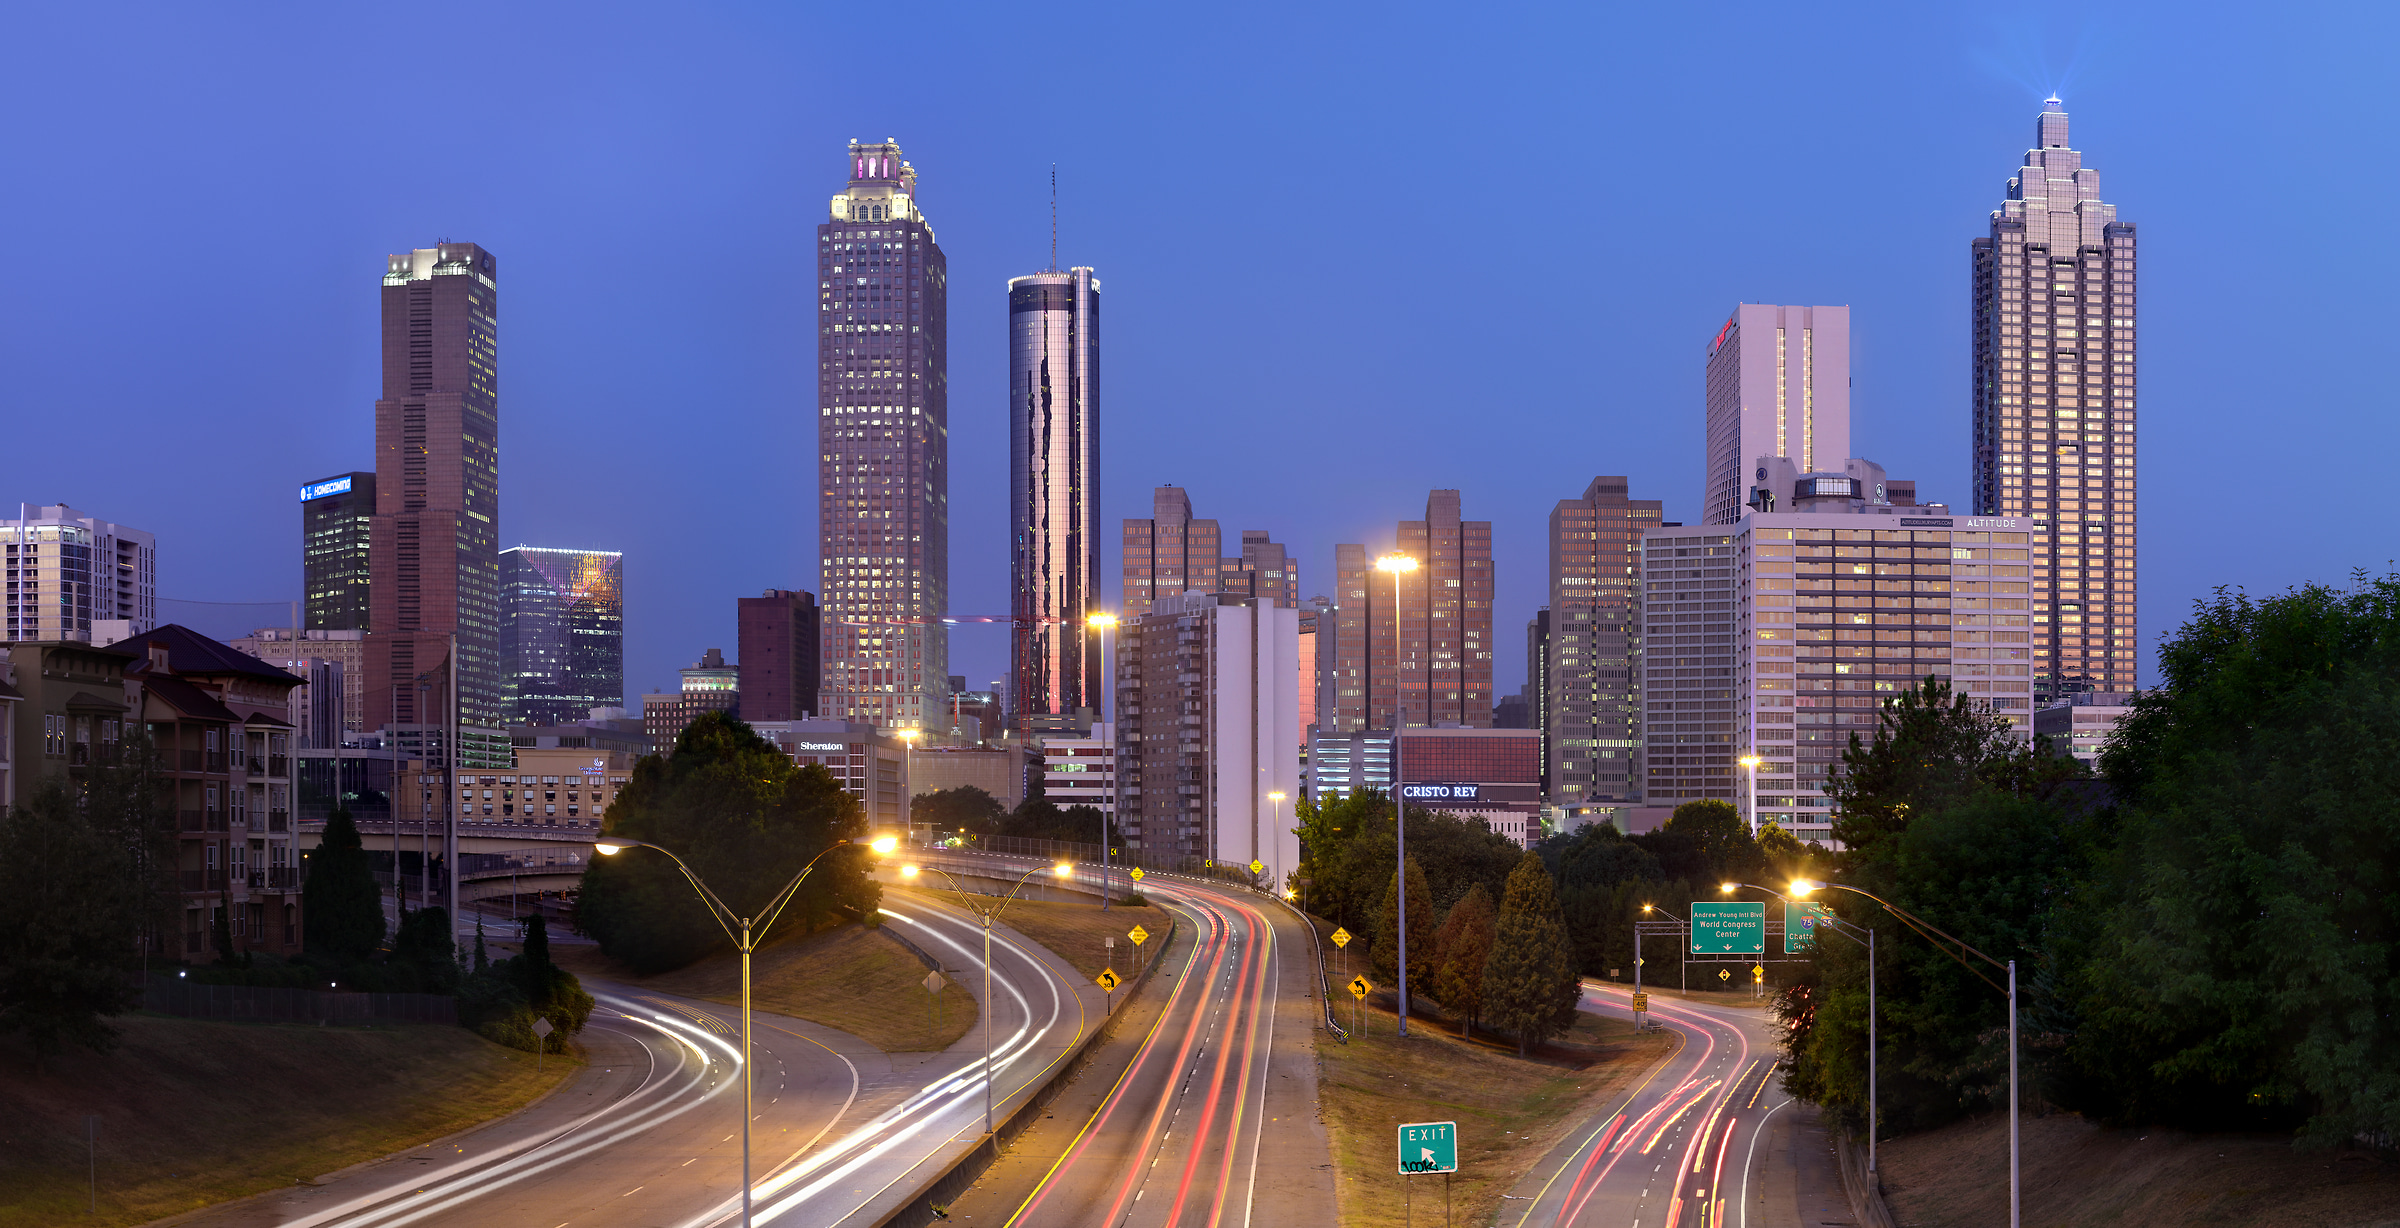 344 megapixels! A very high resolution, large-format VAST photo print of the Atlanta skyline at dusk with highways in the foreground; photograph created by Phil Crawshay in Jackson Street Bridge, Atlanta Georgia